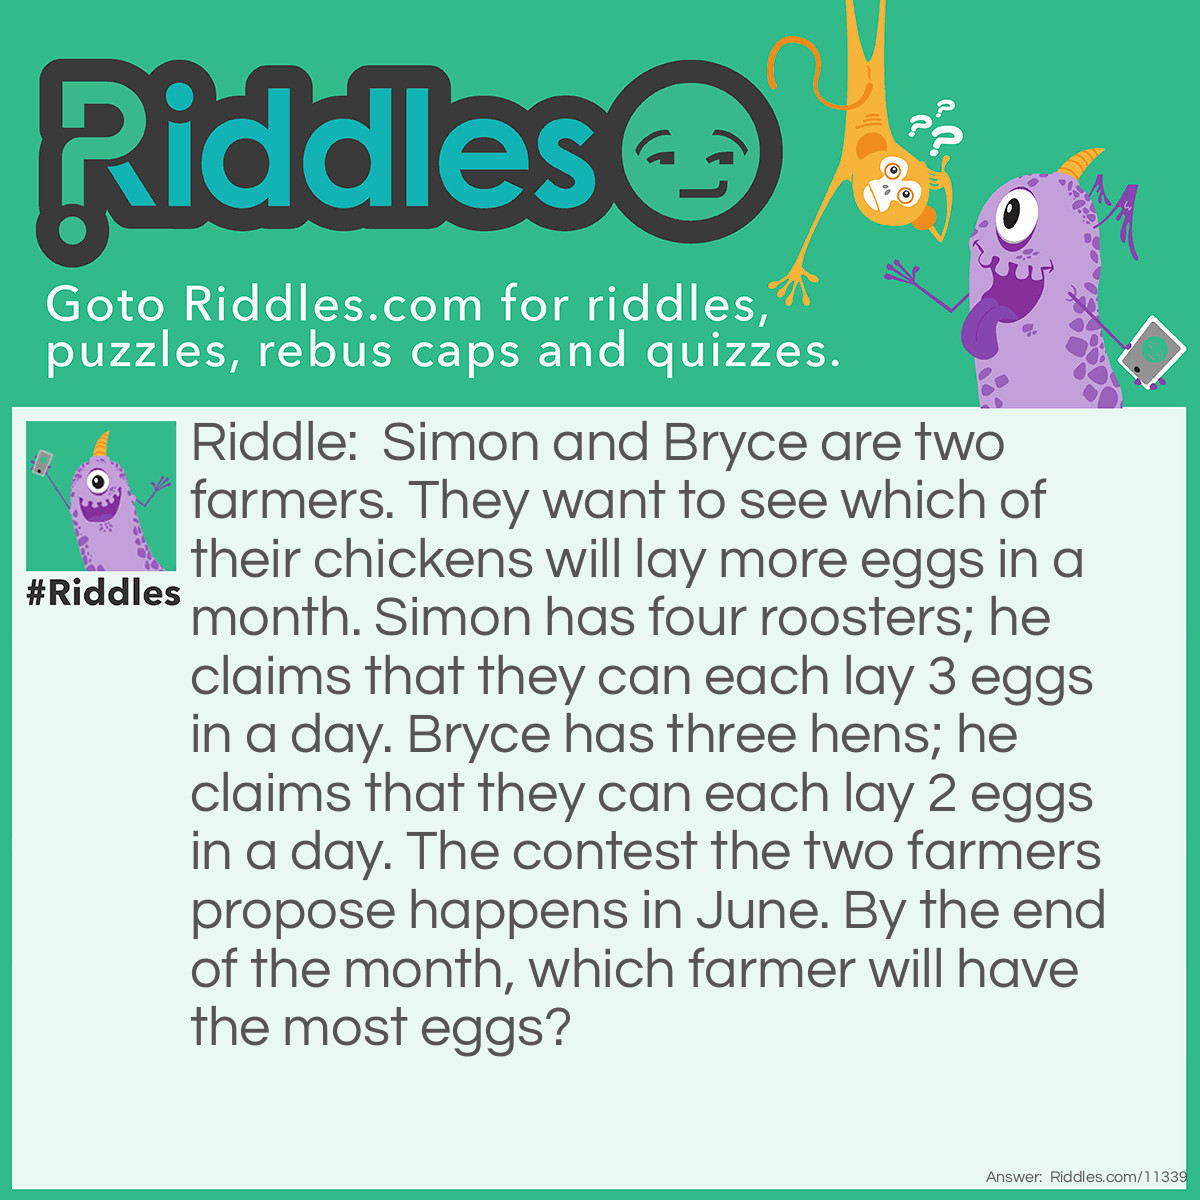 Riddle: Simon and Bryce are two farmers. They want to see which of their chickens will lay more eggs in a month. Simon has four roosters; he claims that they can each lay 3 eggs in a day. Bryce has three hens; he claims that they can each lay 2 eggs in a day. The contest the two farmers propose happens in June. By the end of the month, which farmer will have the most eggs? Answer: Bryce will have more eggs than Simon, simply because Simon is lying. Roosters don't lay eggs, so Simon will not have any eggs by the end of June.